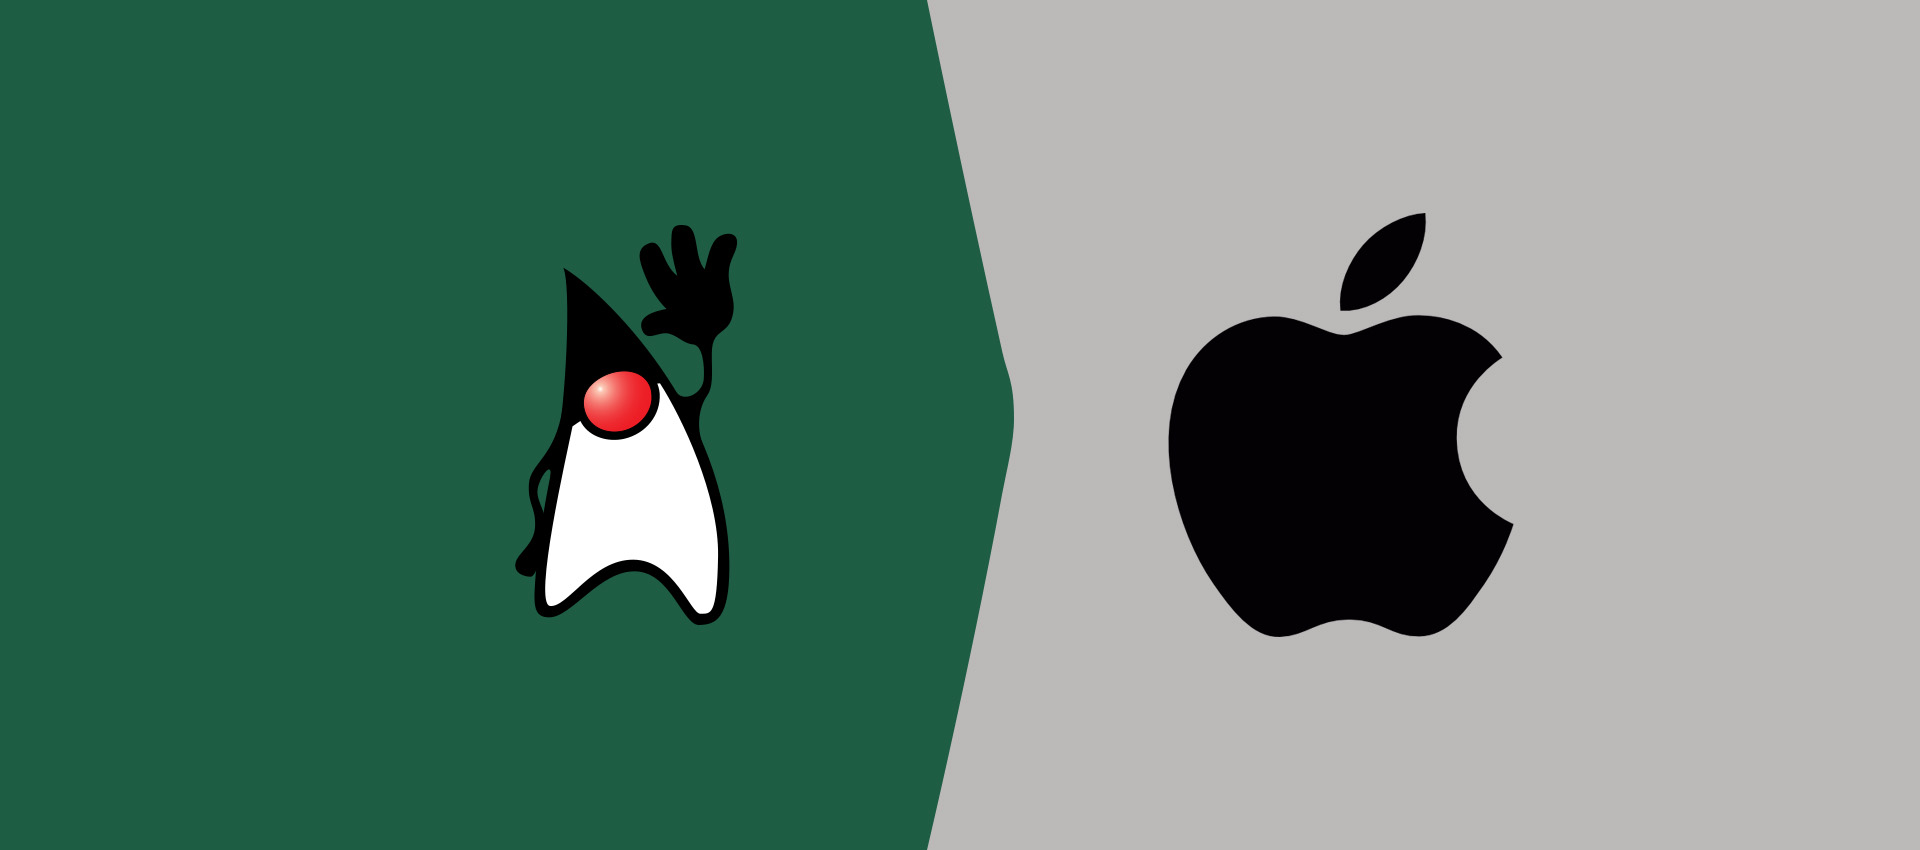 How To Install OpenJDK 15 On Mac